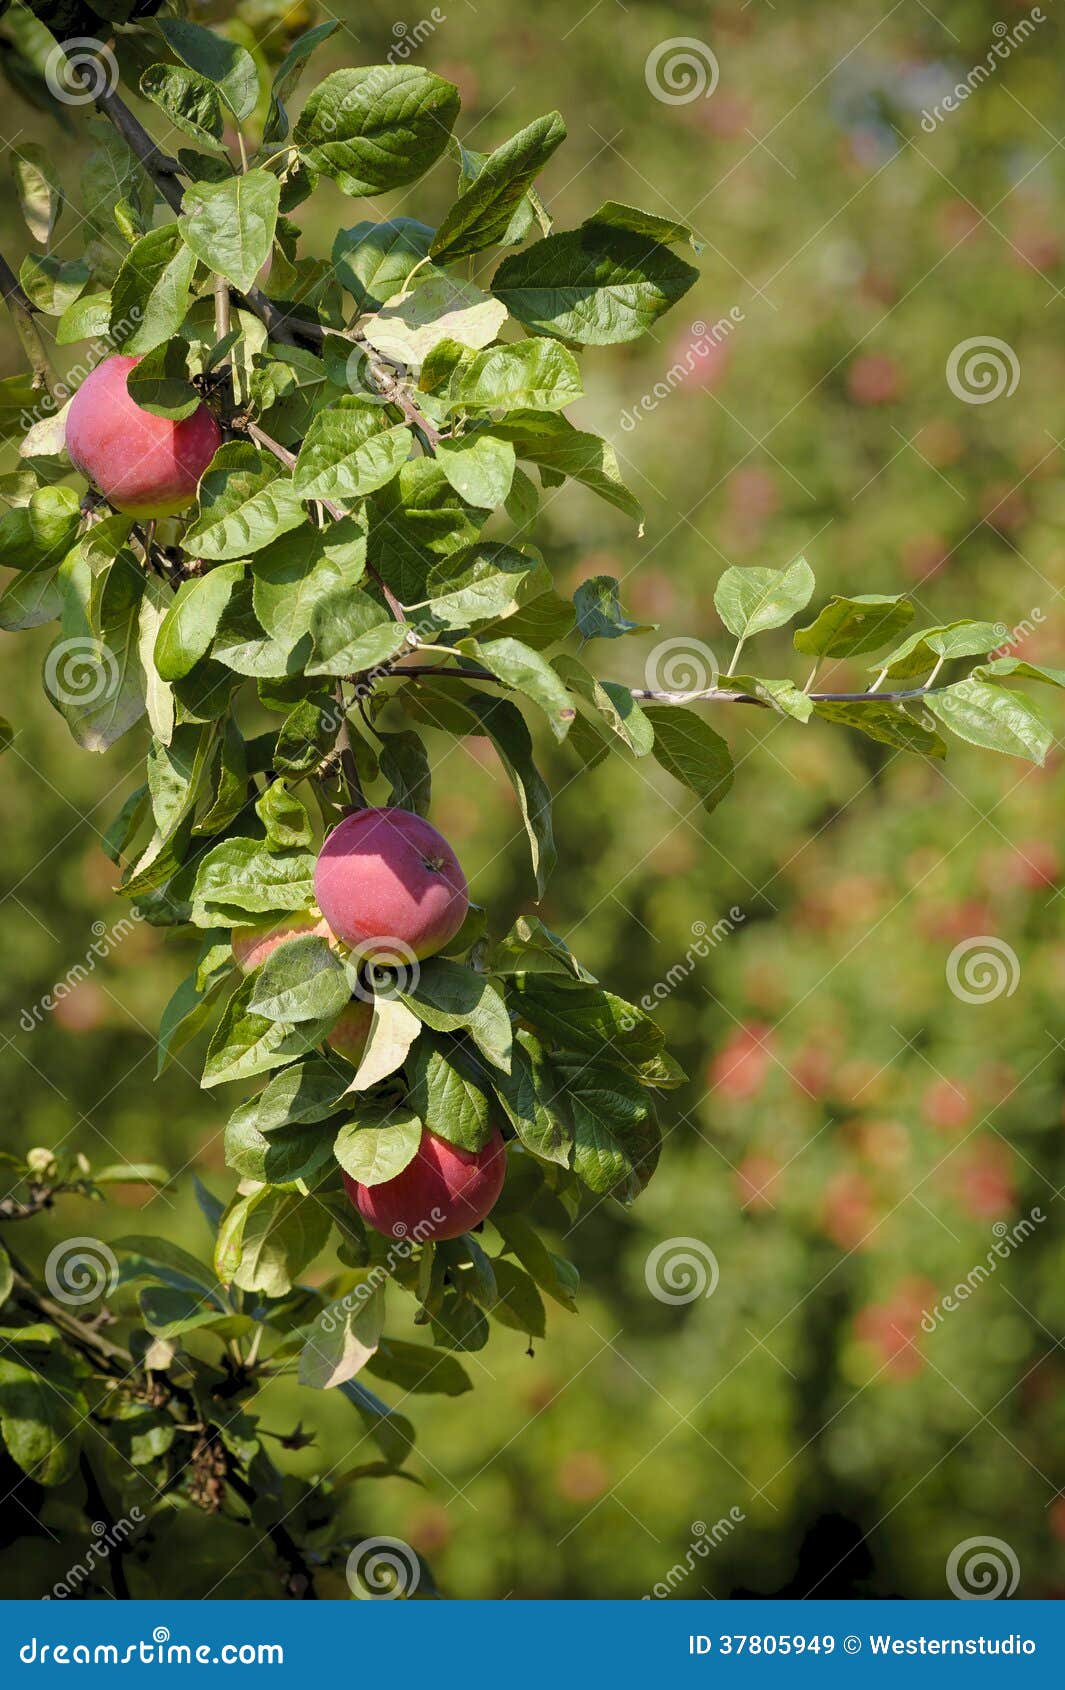 A Fragment of an Apple Tree with Leaves and Red Apples. Stock Image